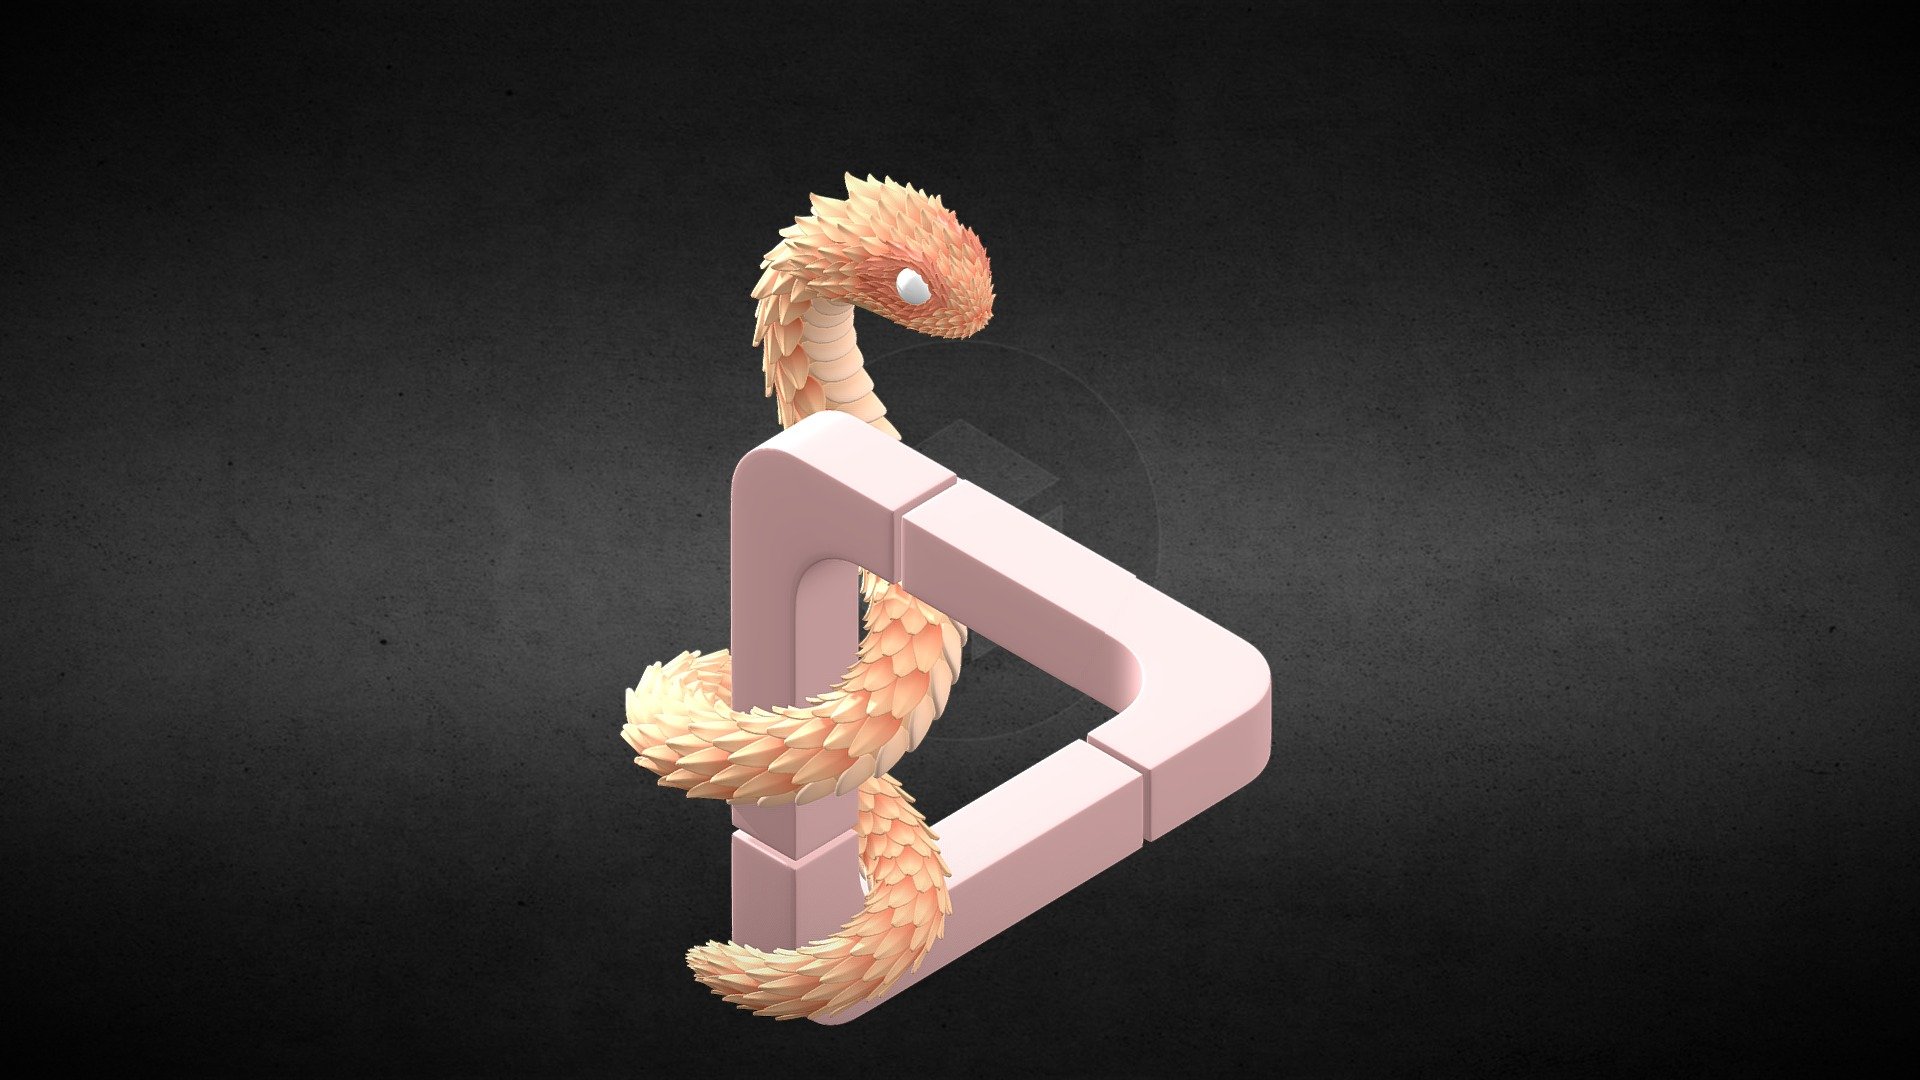 Snake N°1 from my collection of &ldquo;Snakes around Impossible Geometry